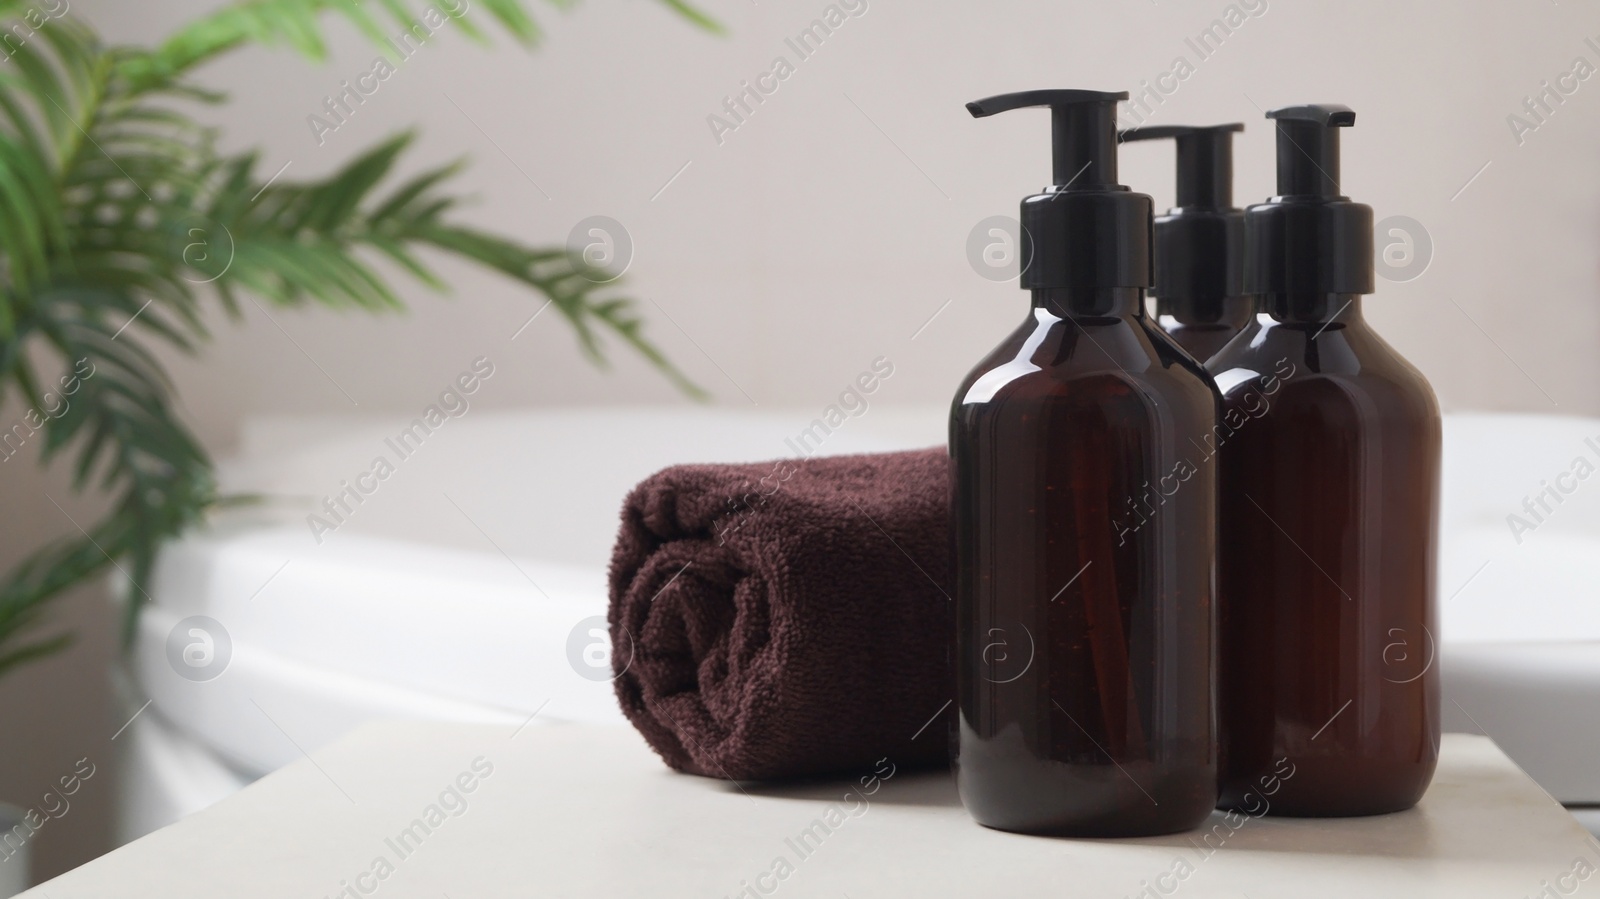 Photo of Bath foam and other personal hygiene products in bottles and rolled towel on small table in bathroom, space for text